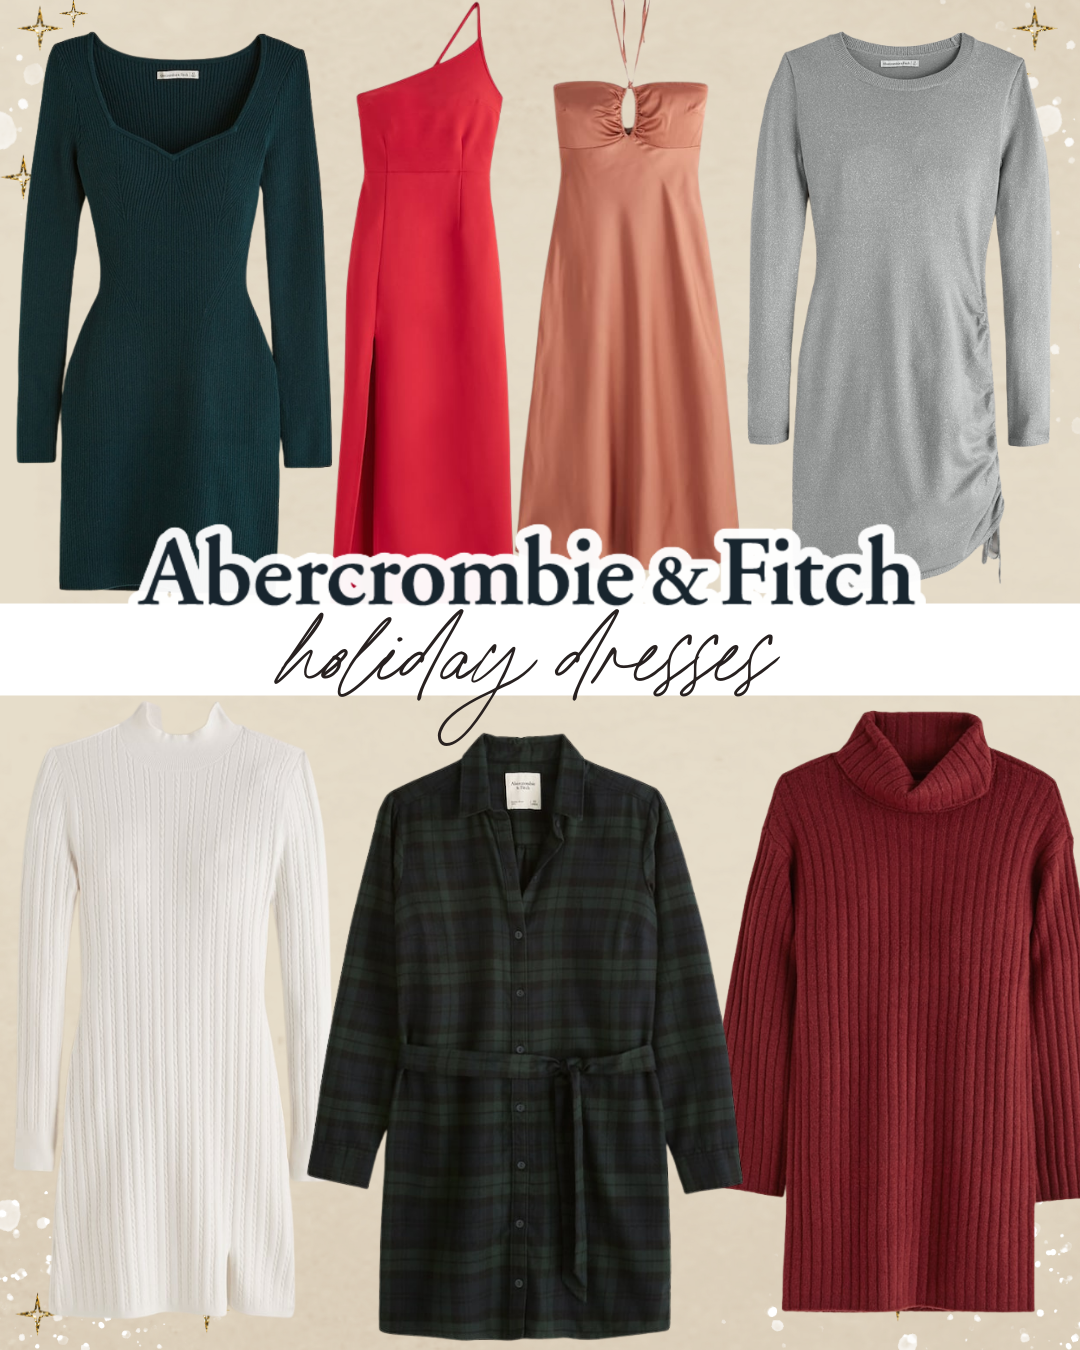 Abercrombie & Fitch Holiday Dresses 2021 - Affordable by Amanda